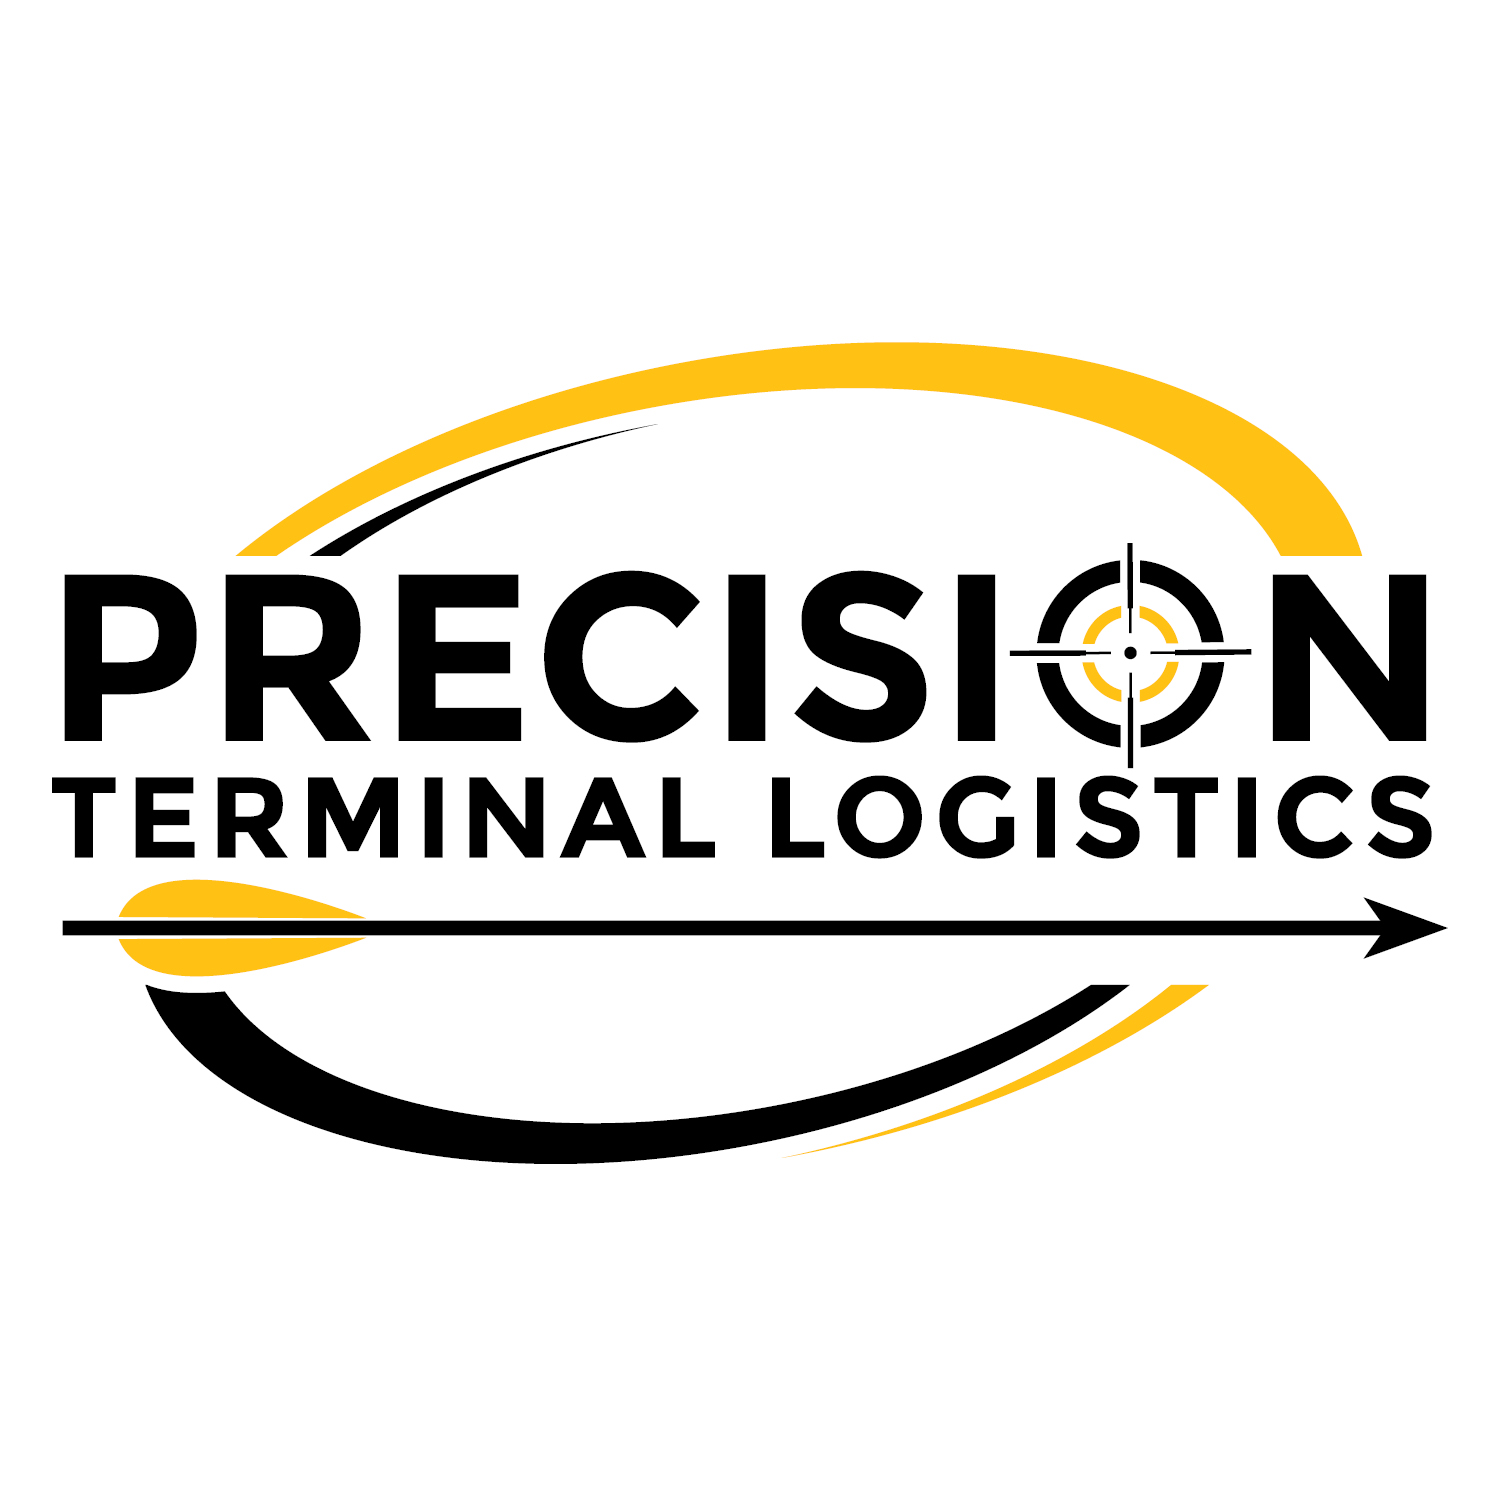 Precision Terminal Logistics logo written in black and yellow with the "O" in the shape of a target and arrow